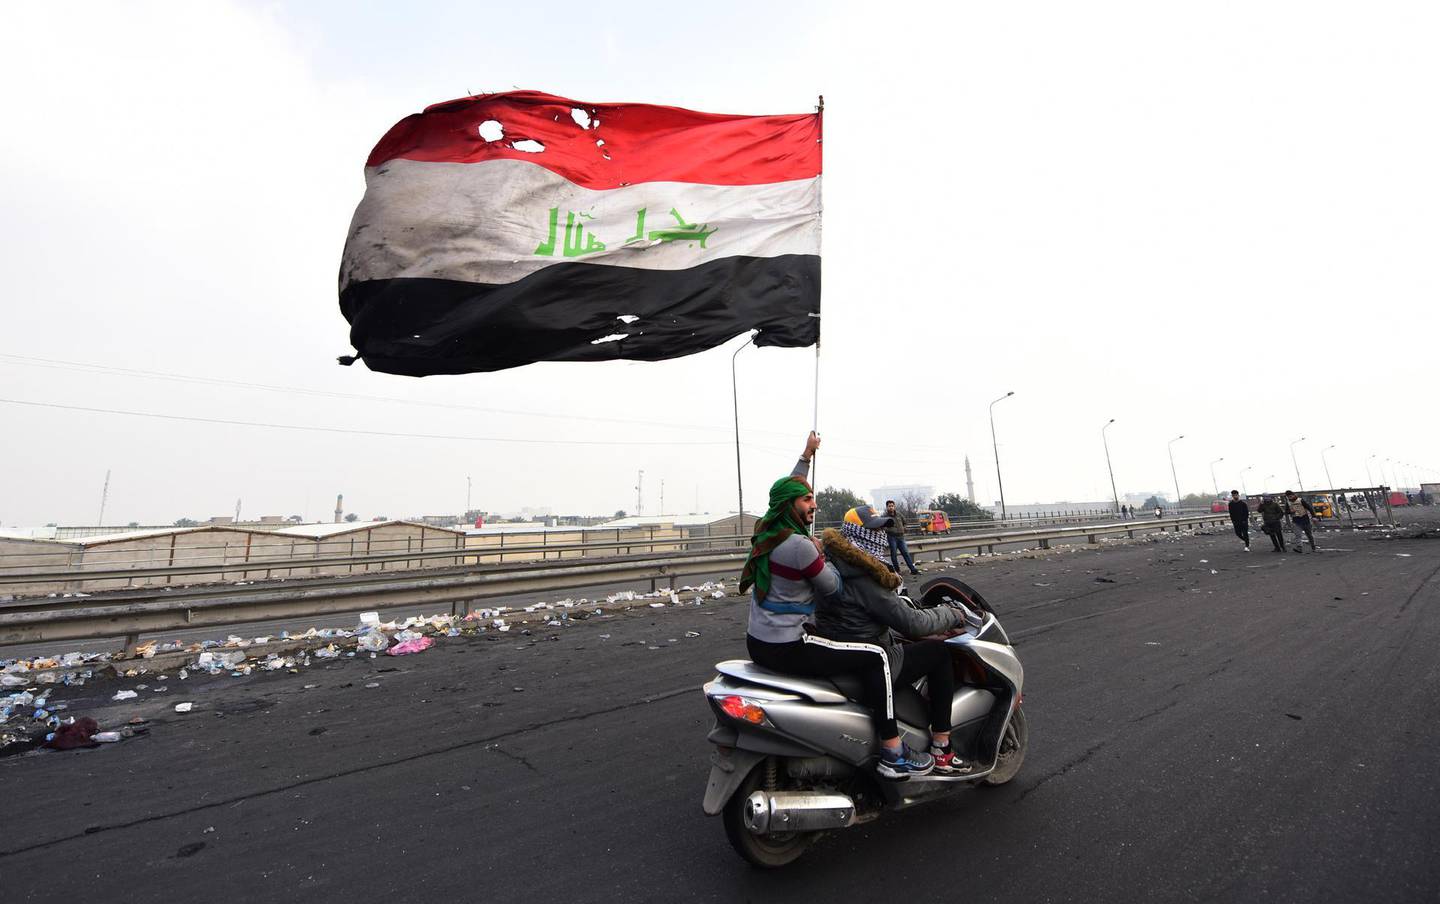 epa08155171 An Iraqi protester waves the Iraqi national flag during a protest in central Baghdad, Iraq, 23 January 2020. The death toll from clashes between protesters and Iraqi security forces rose to 12 victims from the protesters, as protesters continued closing the main roads in central Baghdad and gathering in Tahrir Square to protest against the Iraqi government.  EPA/MURTAJA LATEEF